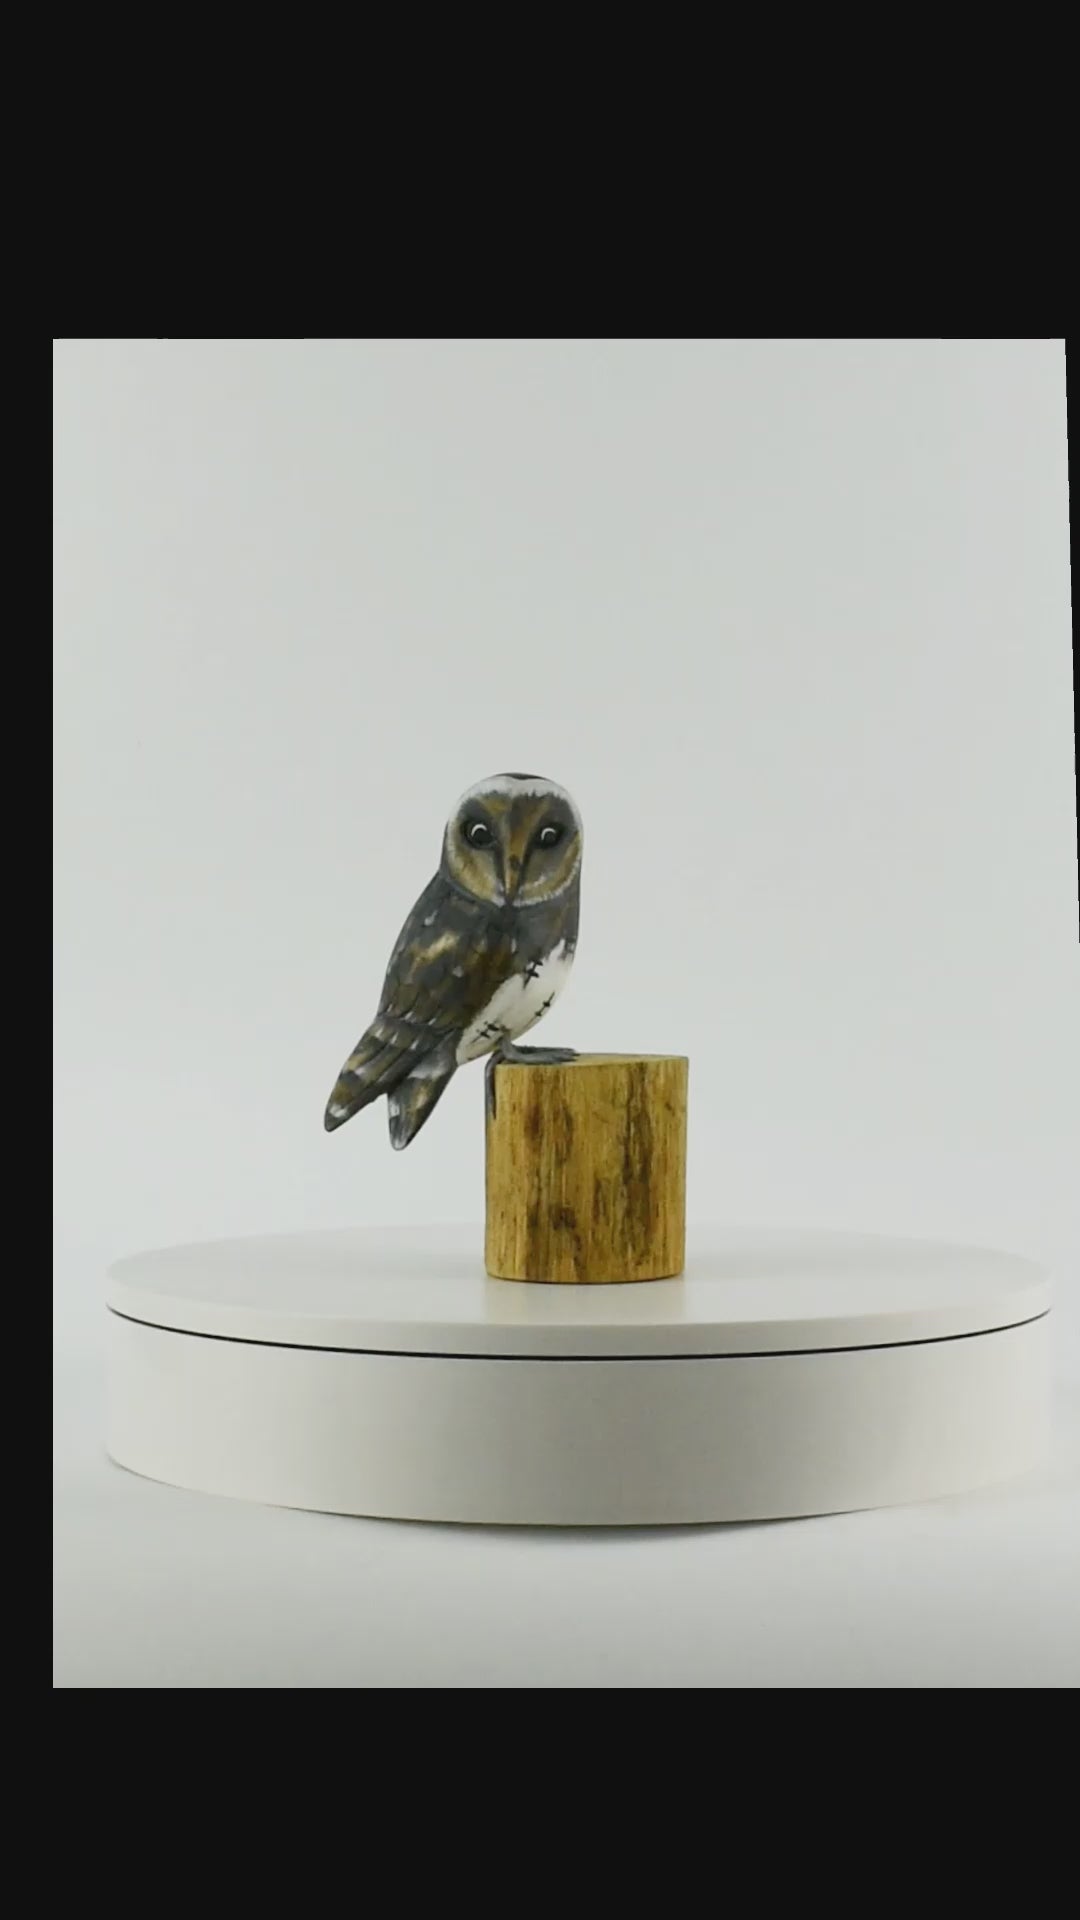 Wooden Hand Carved Owl Standing on Log Statue Bird Figurine Sculpture Art Decorative Home Decor Accent Gift Handcrafted Decoration Handmade